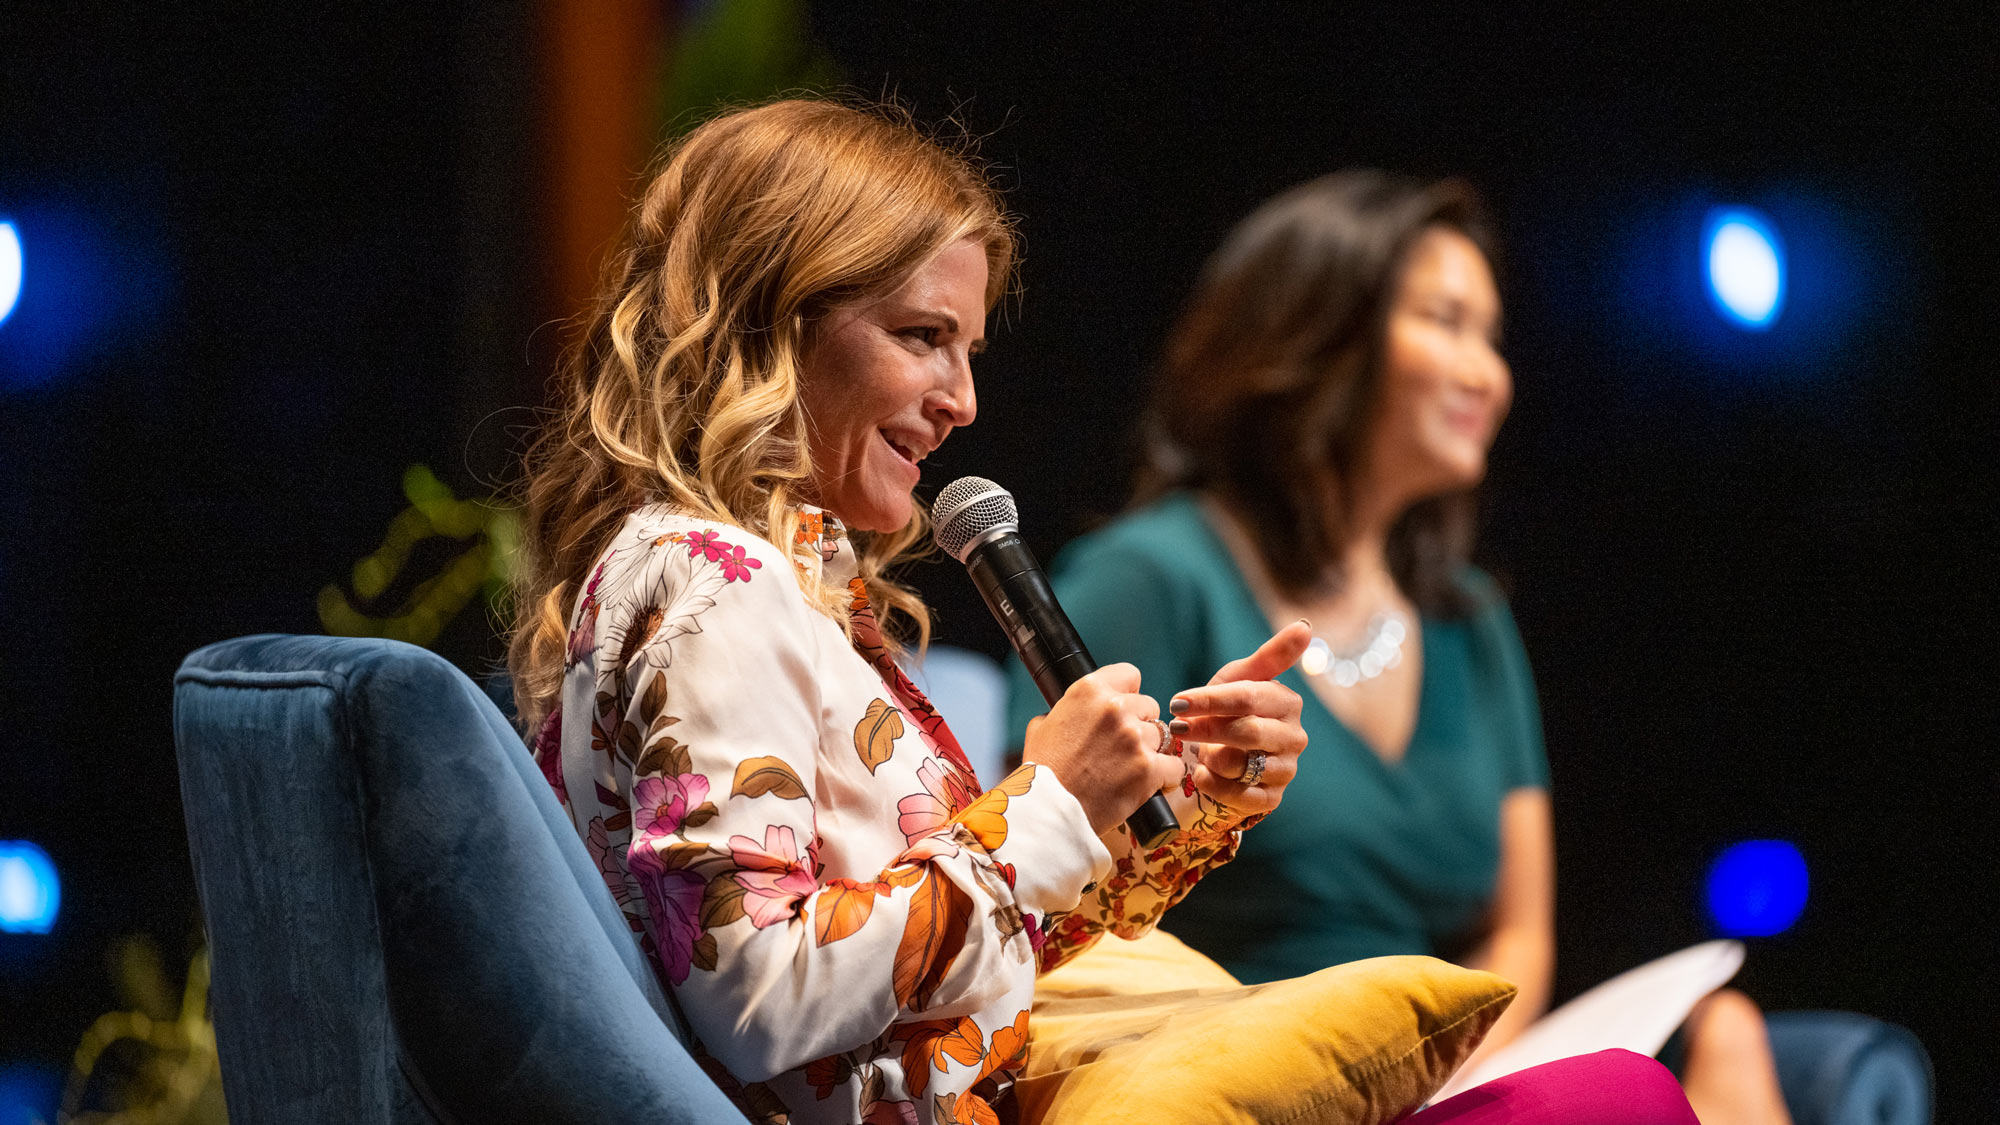 Glennon Doyle, left, in conversation with Pamela Wu, director of communications and media relations, UC Davis Health. (José Luis Villegas)